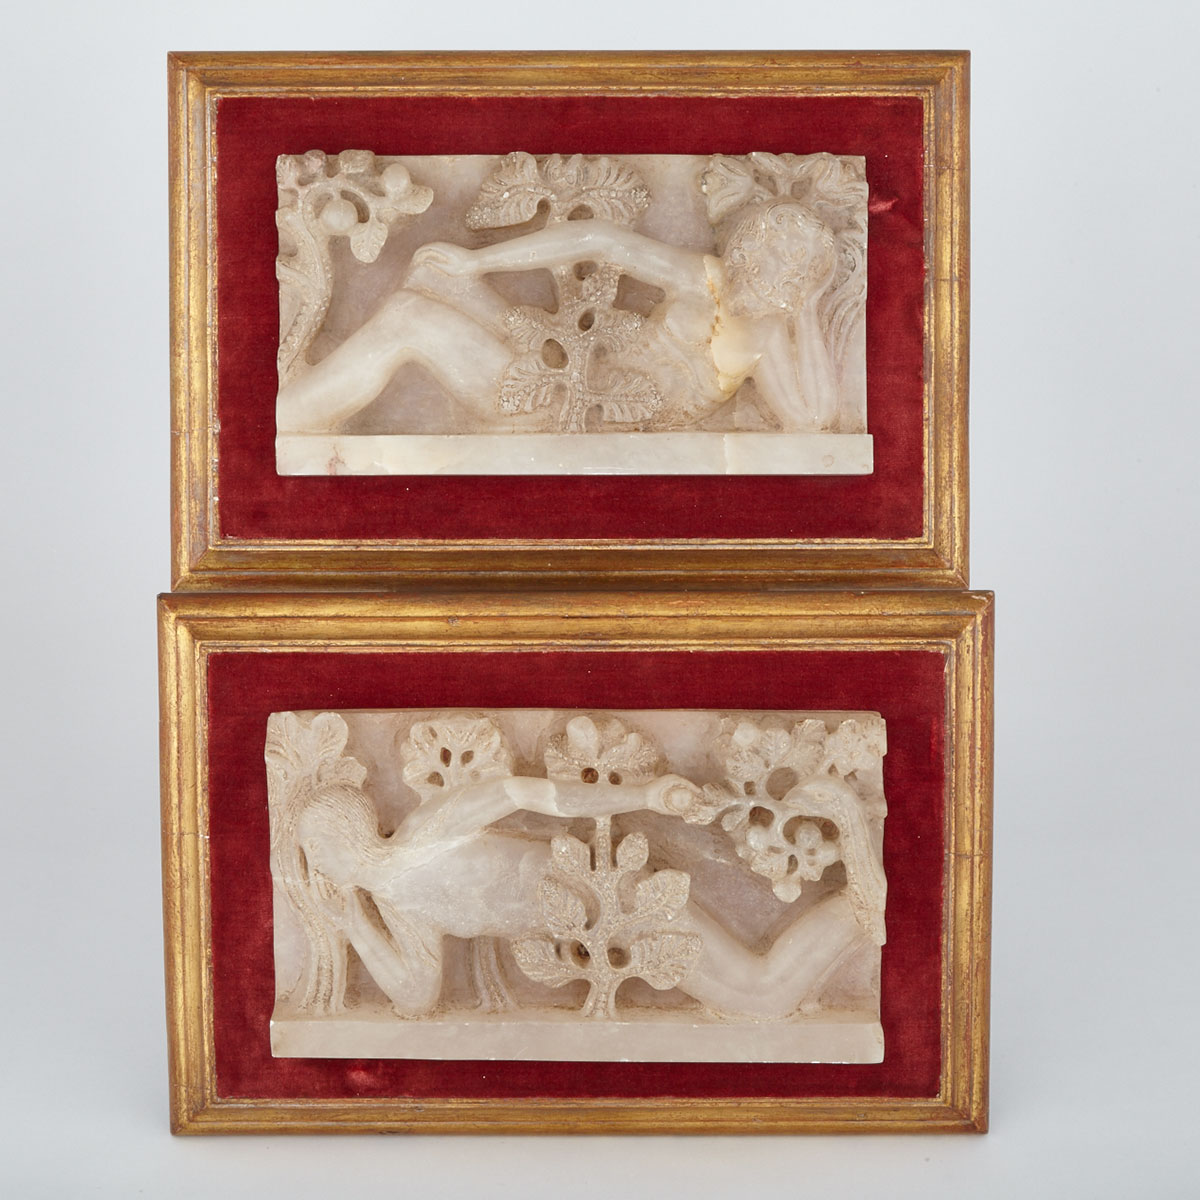 Pair of French Relief Carved Alabaster Plaques of Adam & Eve, after Gislebertus,  20th century